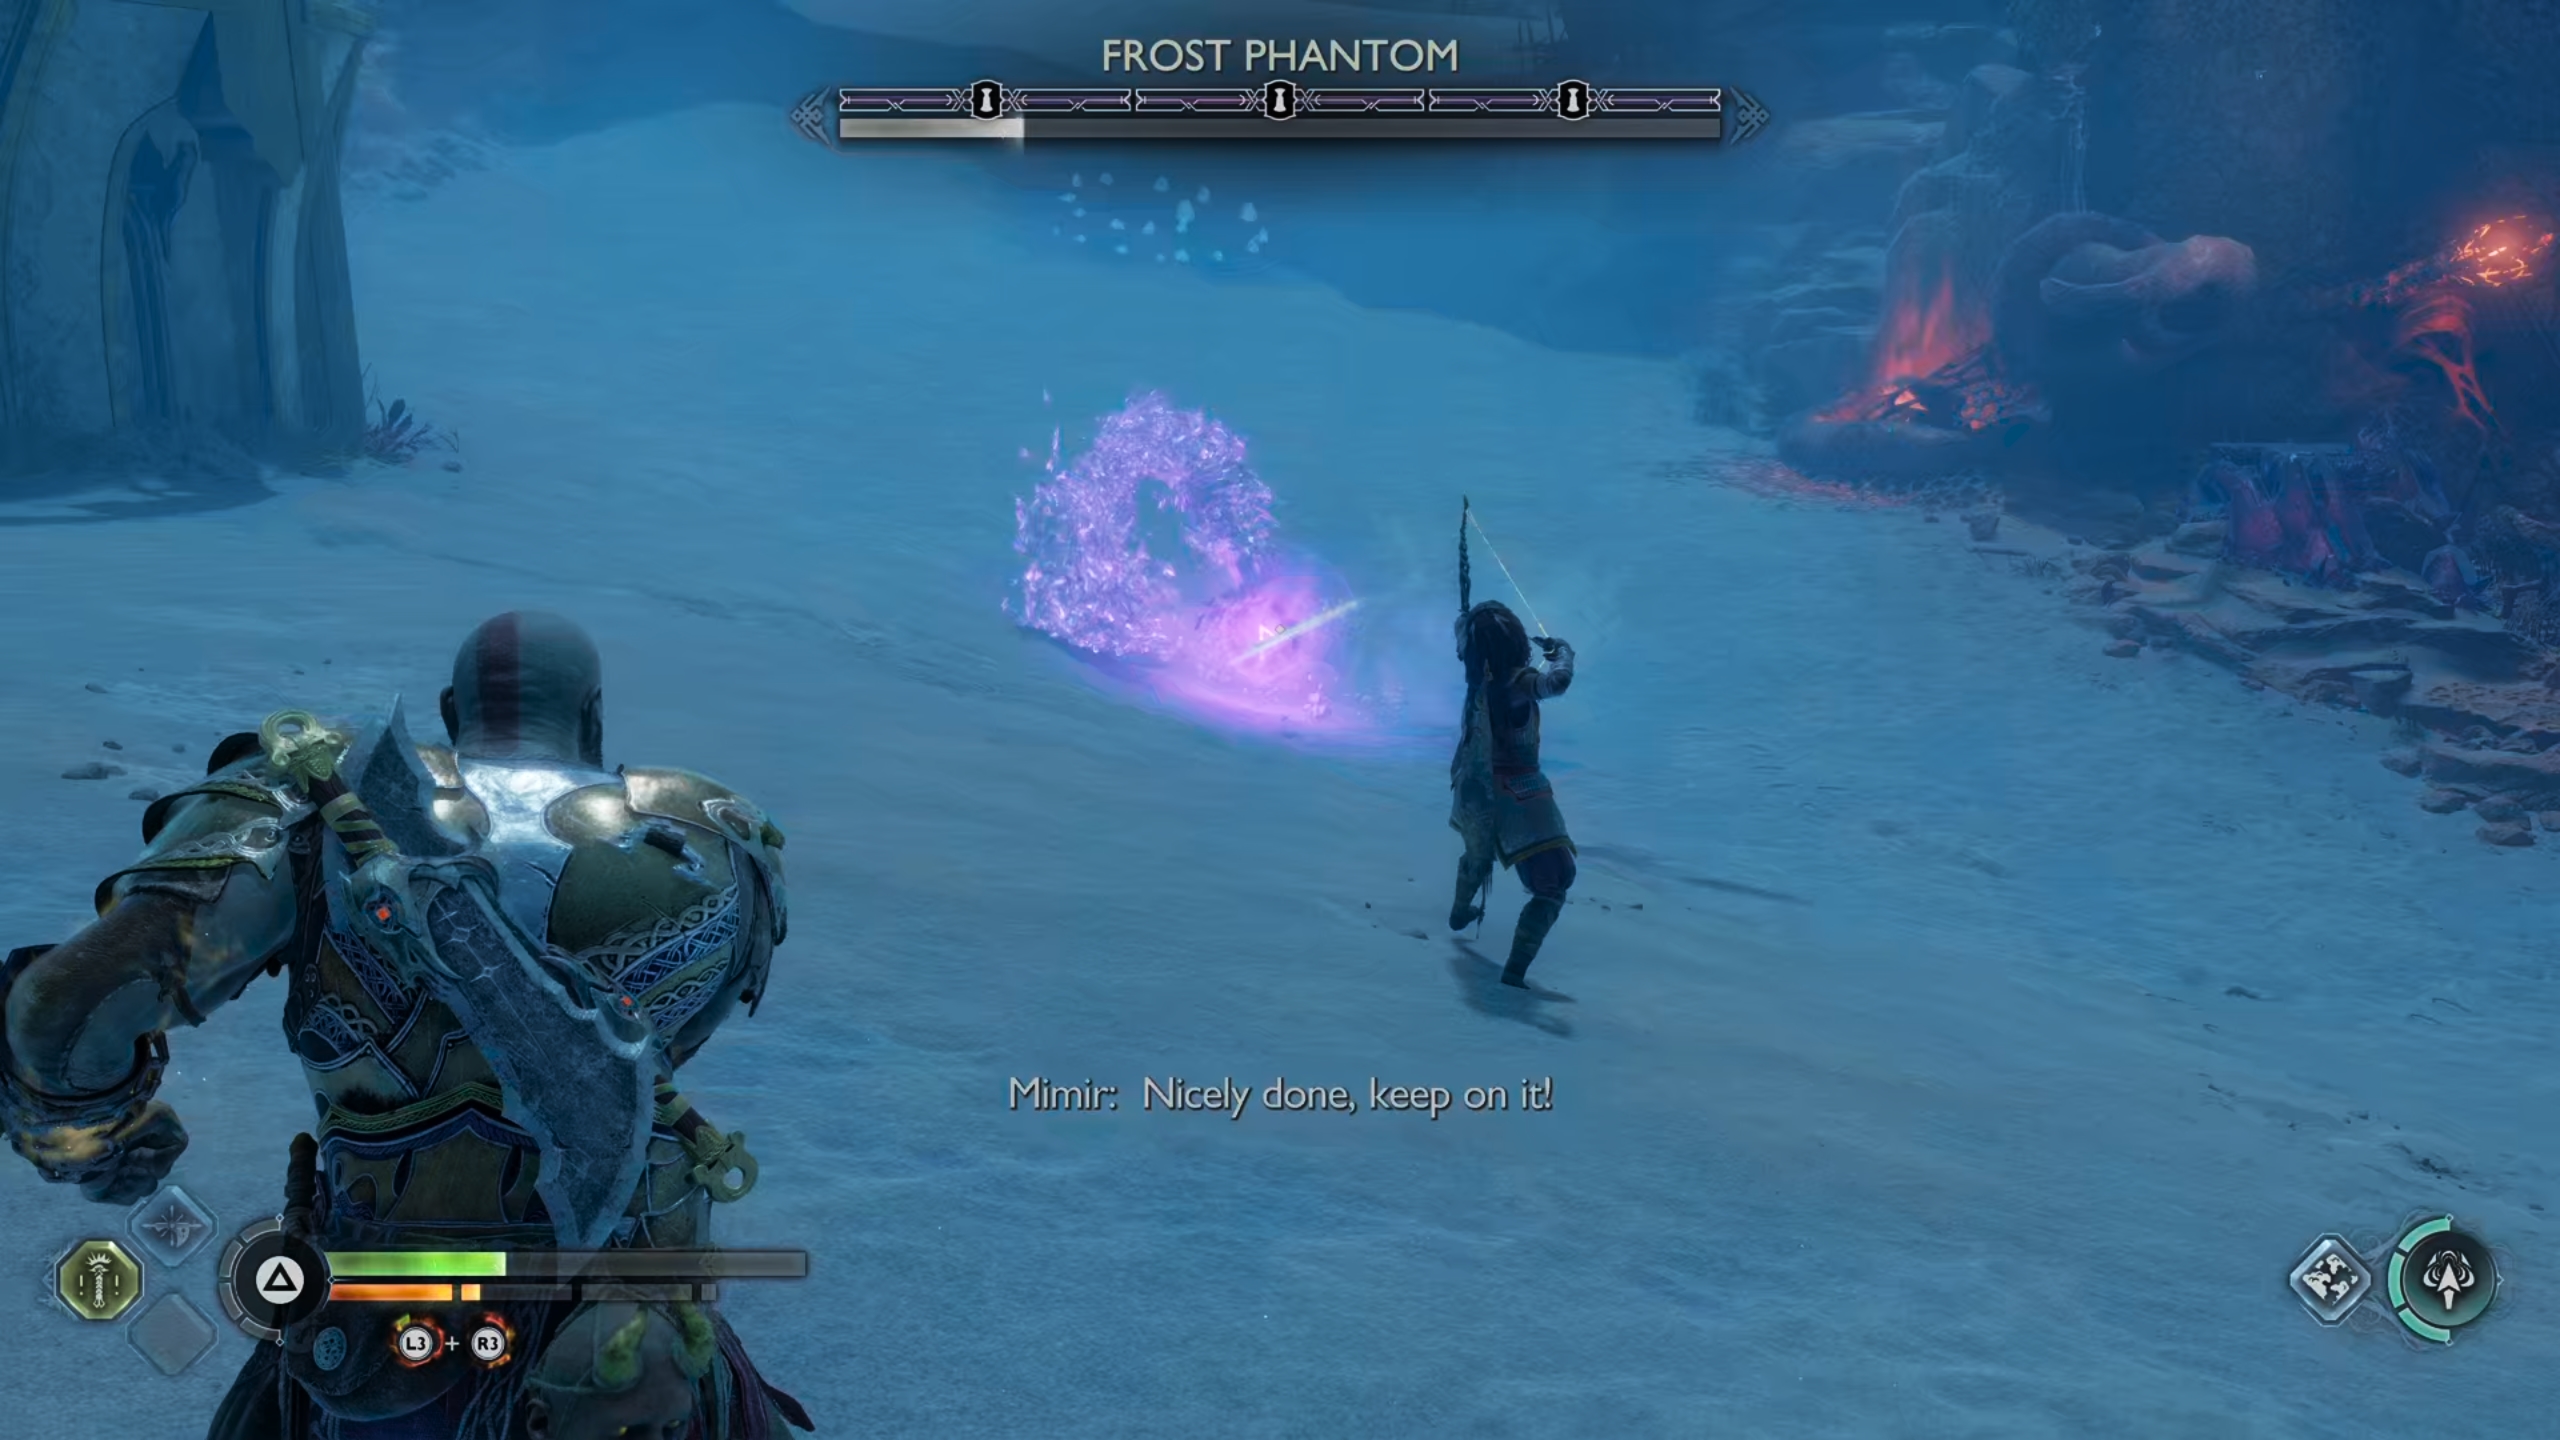 If you hit the Frost Phantom enough it will become staggered, allowing you to hit it without fear of retaliation.